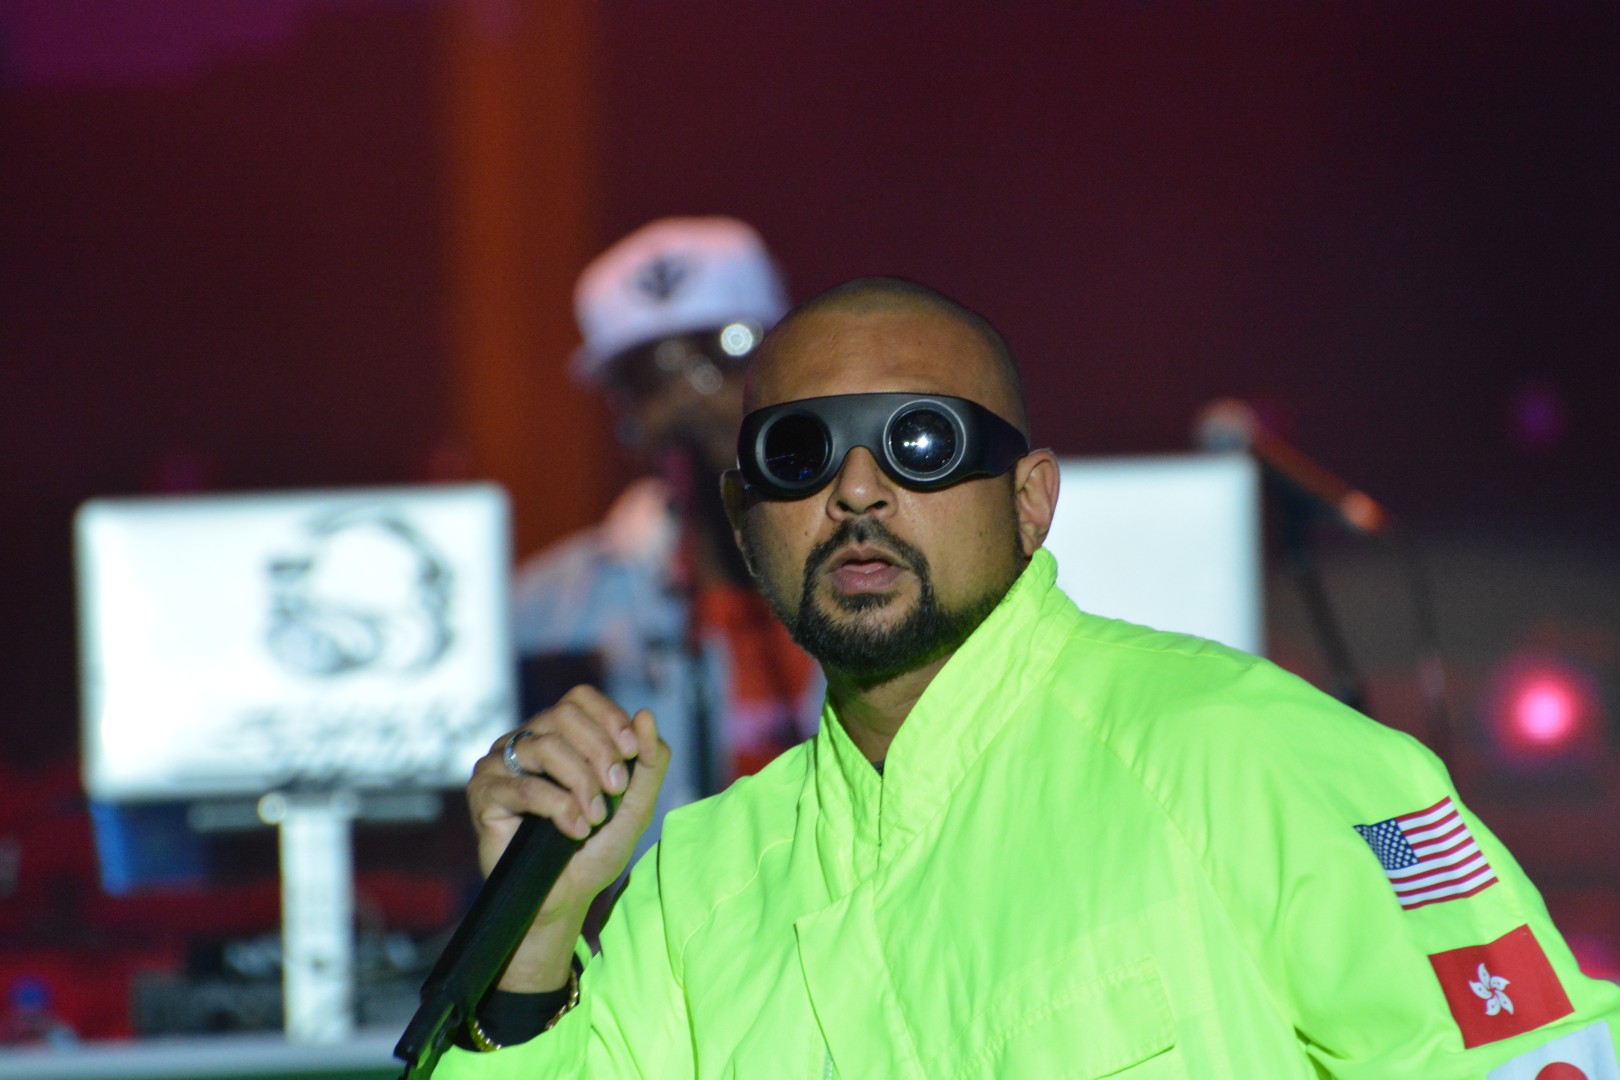 Sean Paul at Neversea Beach in Constanta on July 5, 2019 (082a5ef275)